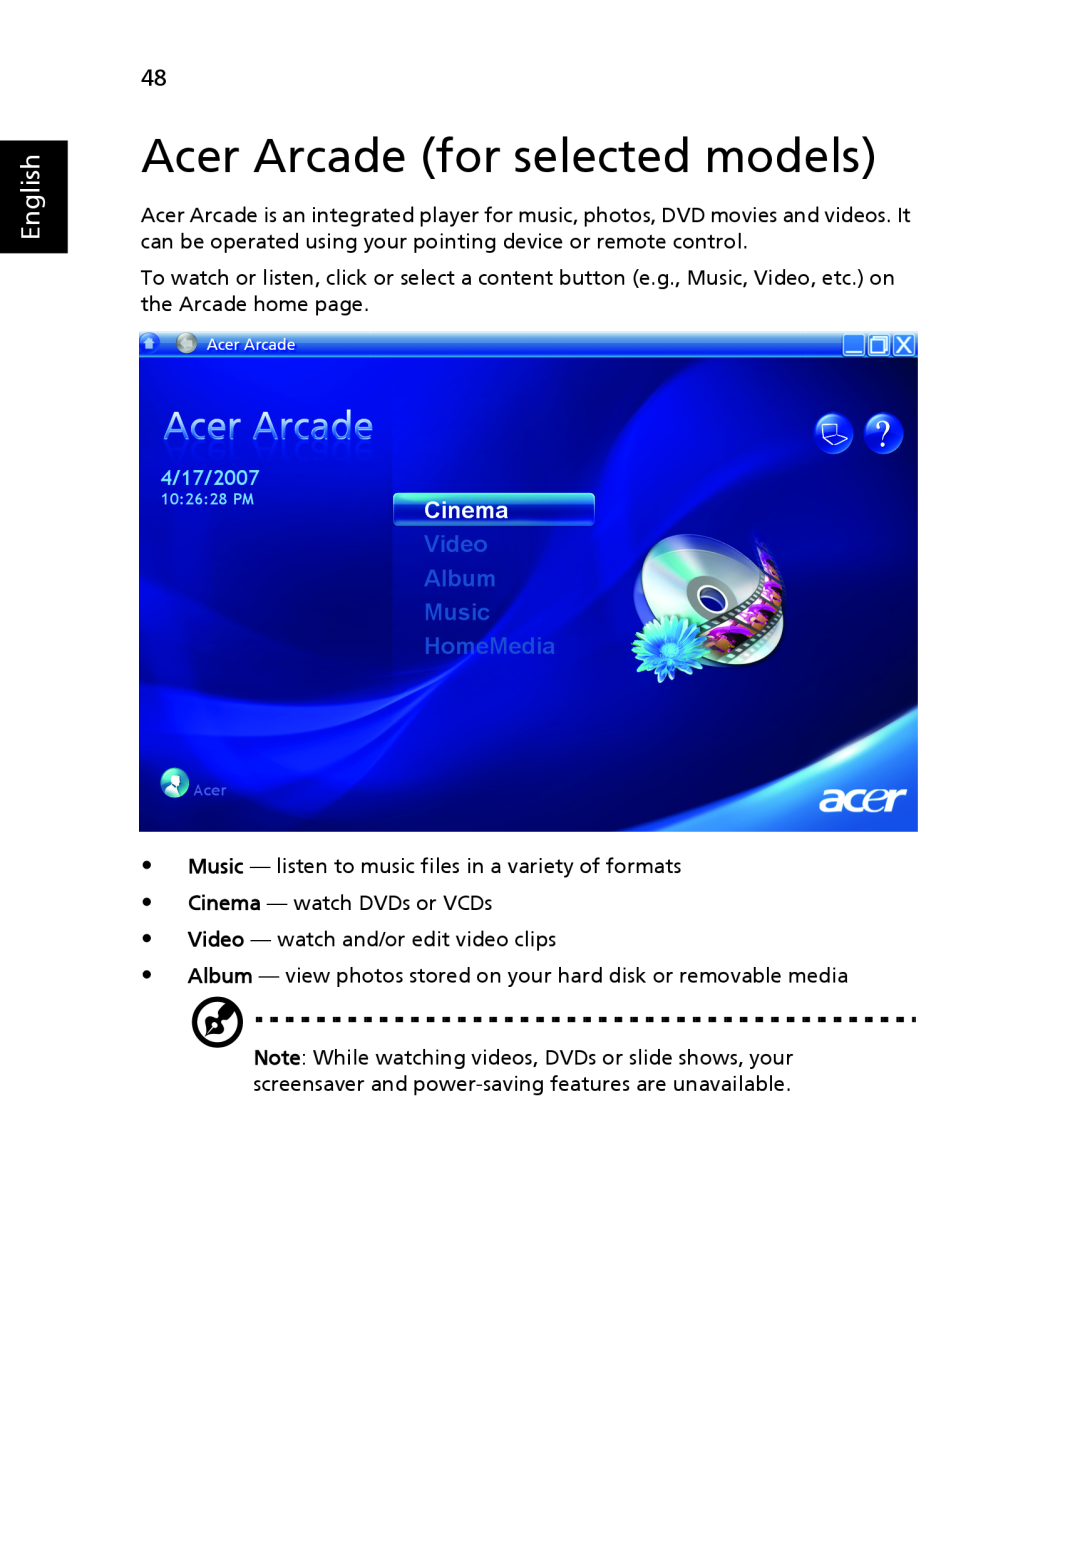 Acer 4920, MS2219 manual Acer Arcade for selected models, English 